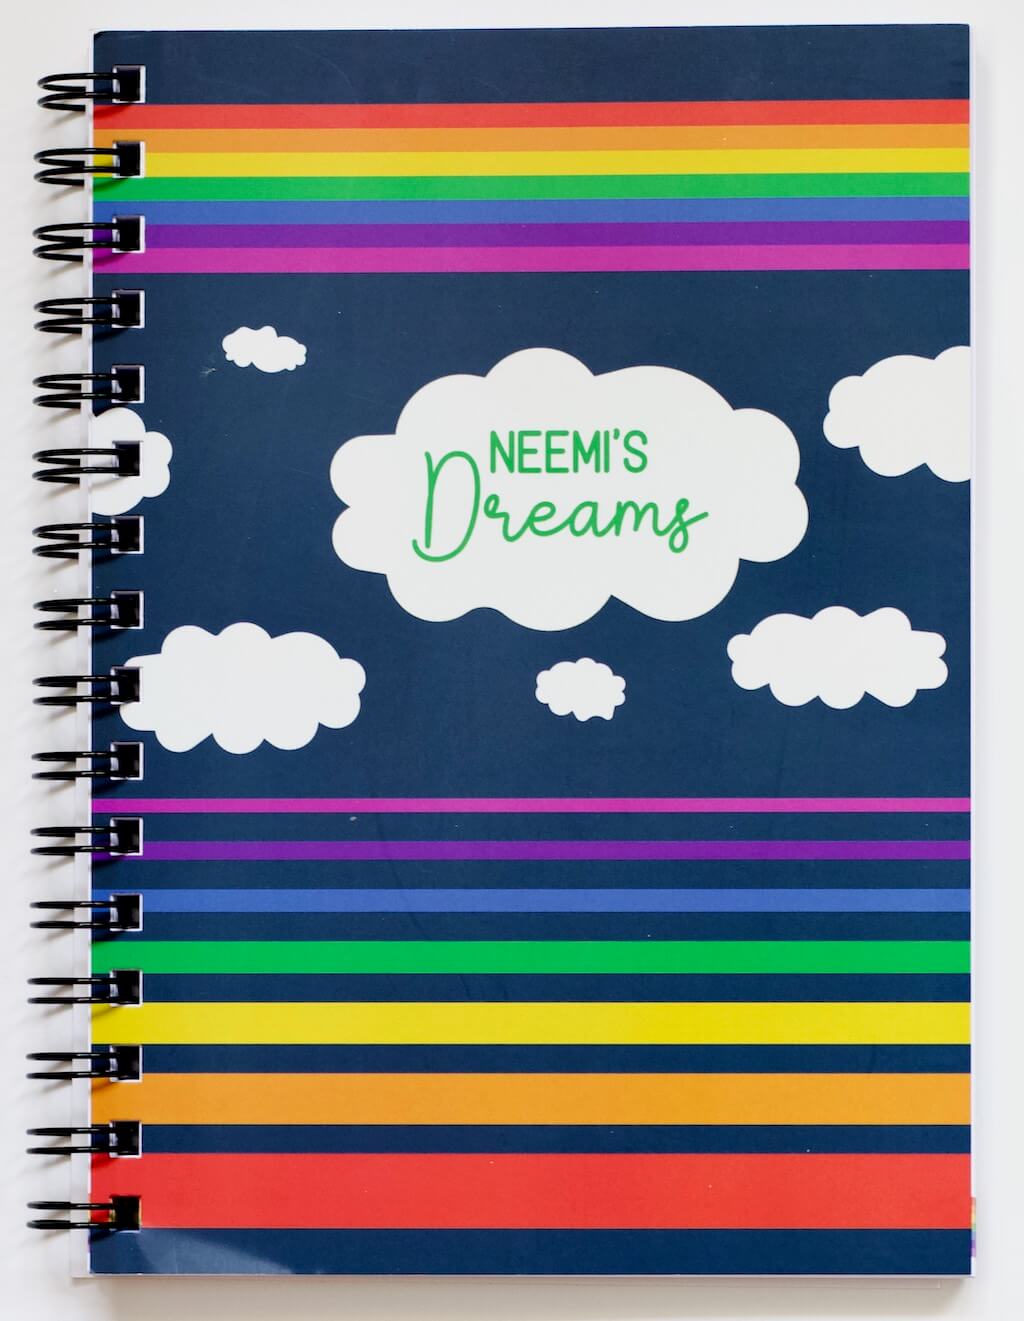 Cover of Haluna Happy Names &#39;In the Sky&#39; spiral-bound personalised A5 notebook in &#39;Night&#39;, showing from top to bottom a band of rainbow stripes, a flotilla of fluffy clouds, the biggest of which bears the notebook&#39;s title &quot;Neemi&#39;s Dreams&quot;, and then separated set of rainbow stripes in inverse order, gradually getting wider from violet to red. The rainbows and clouds are against a dark navy night sky background.